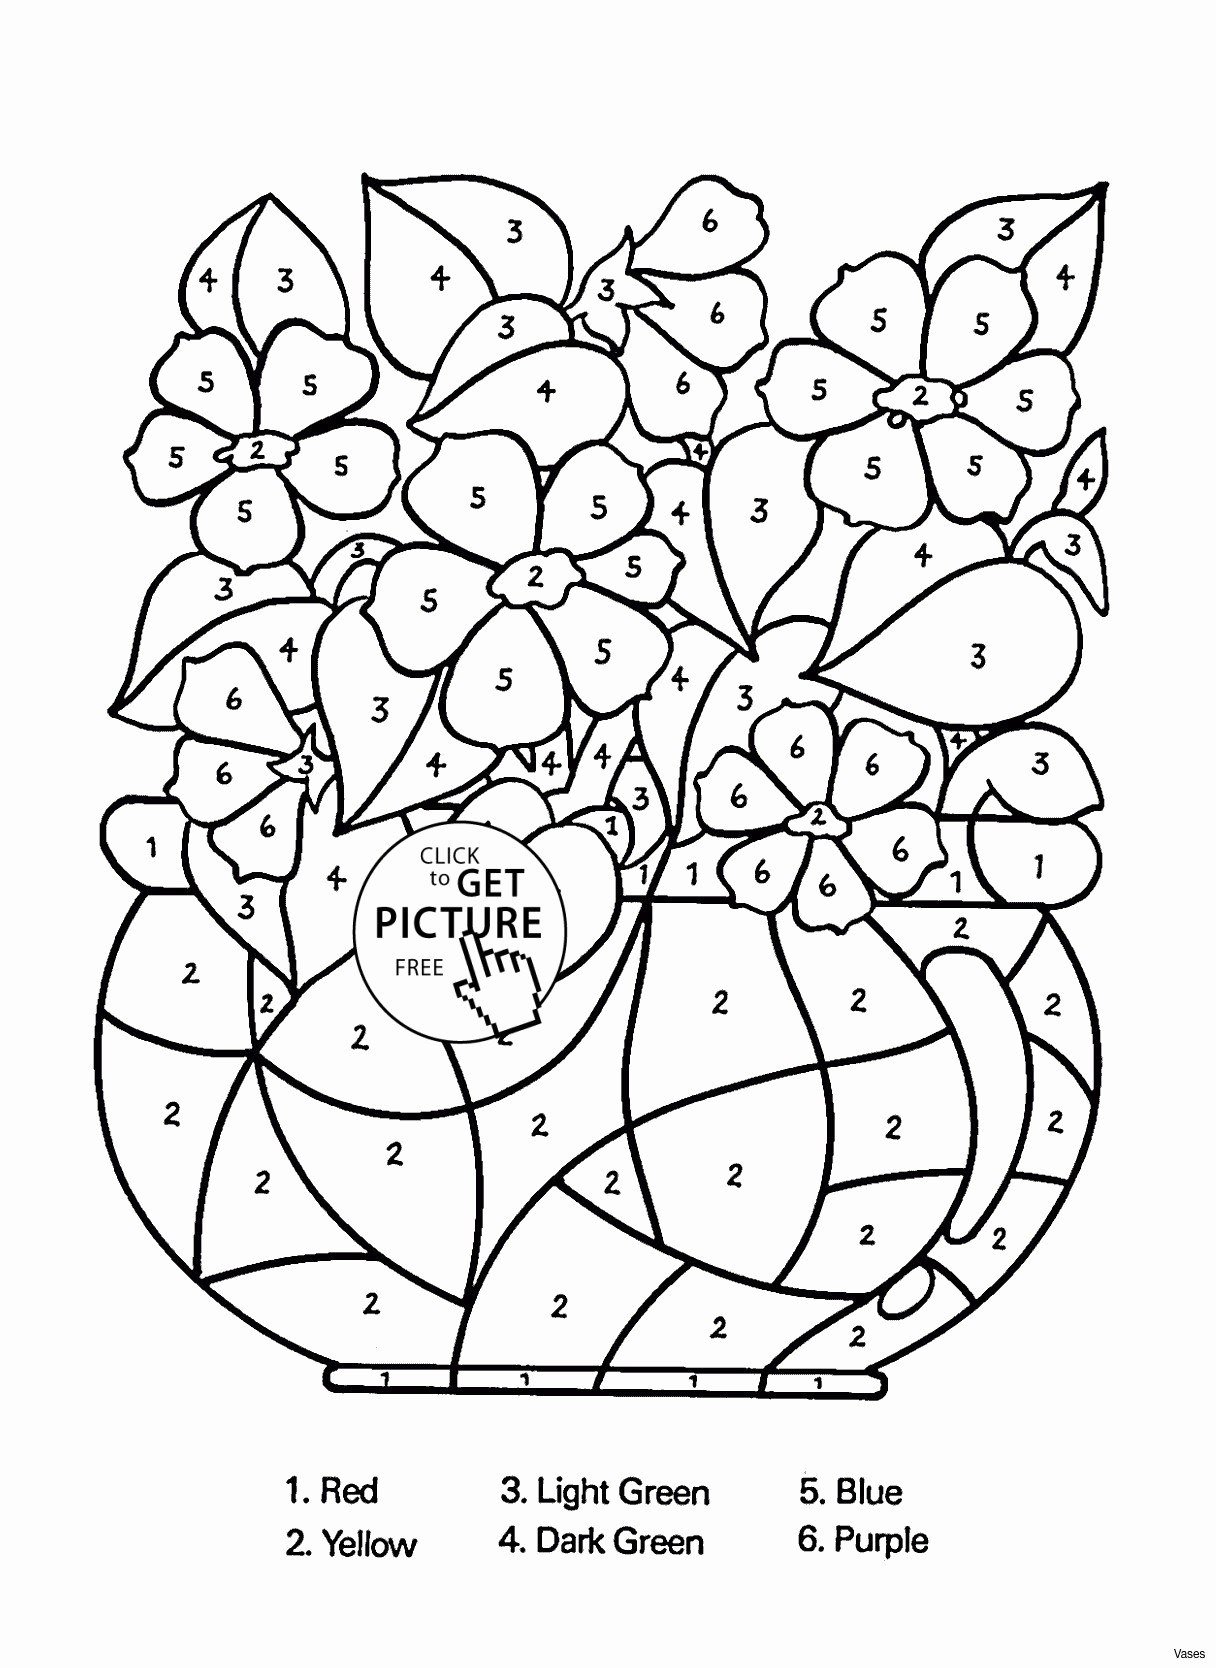 Number 6 Coloring Page Hamster Calculation Color Number Coloring Page Hamster Coloring